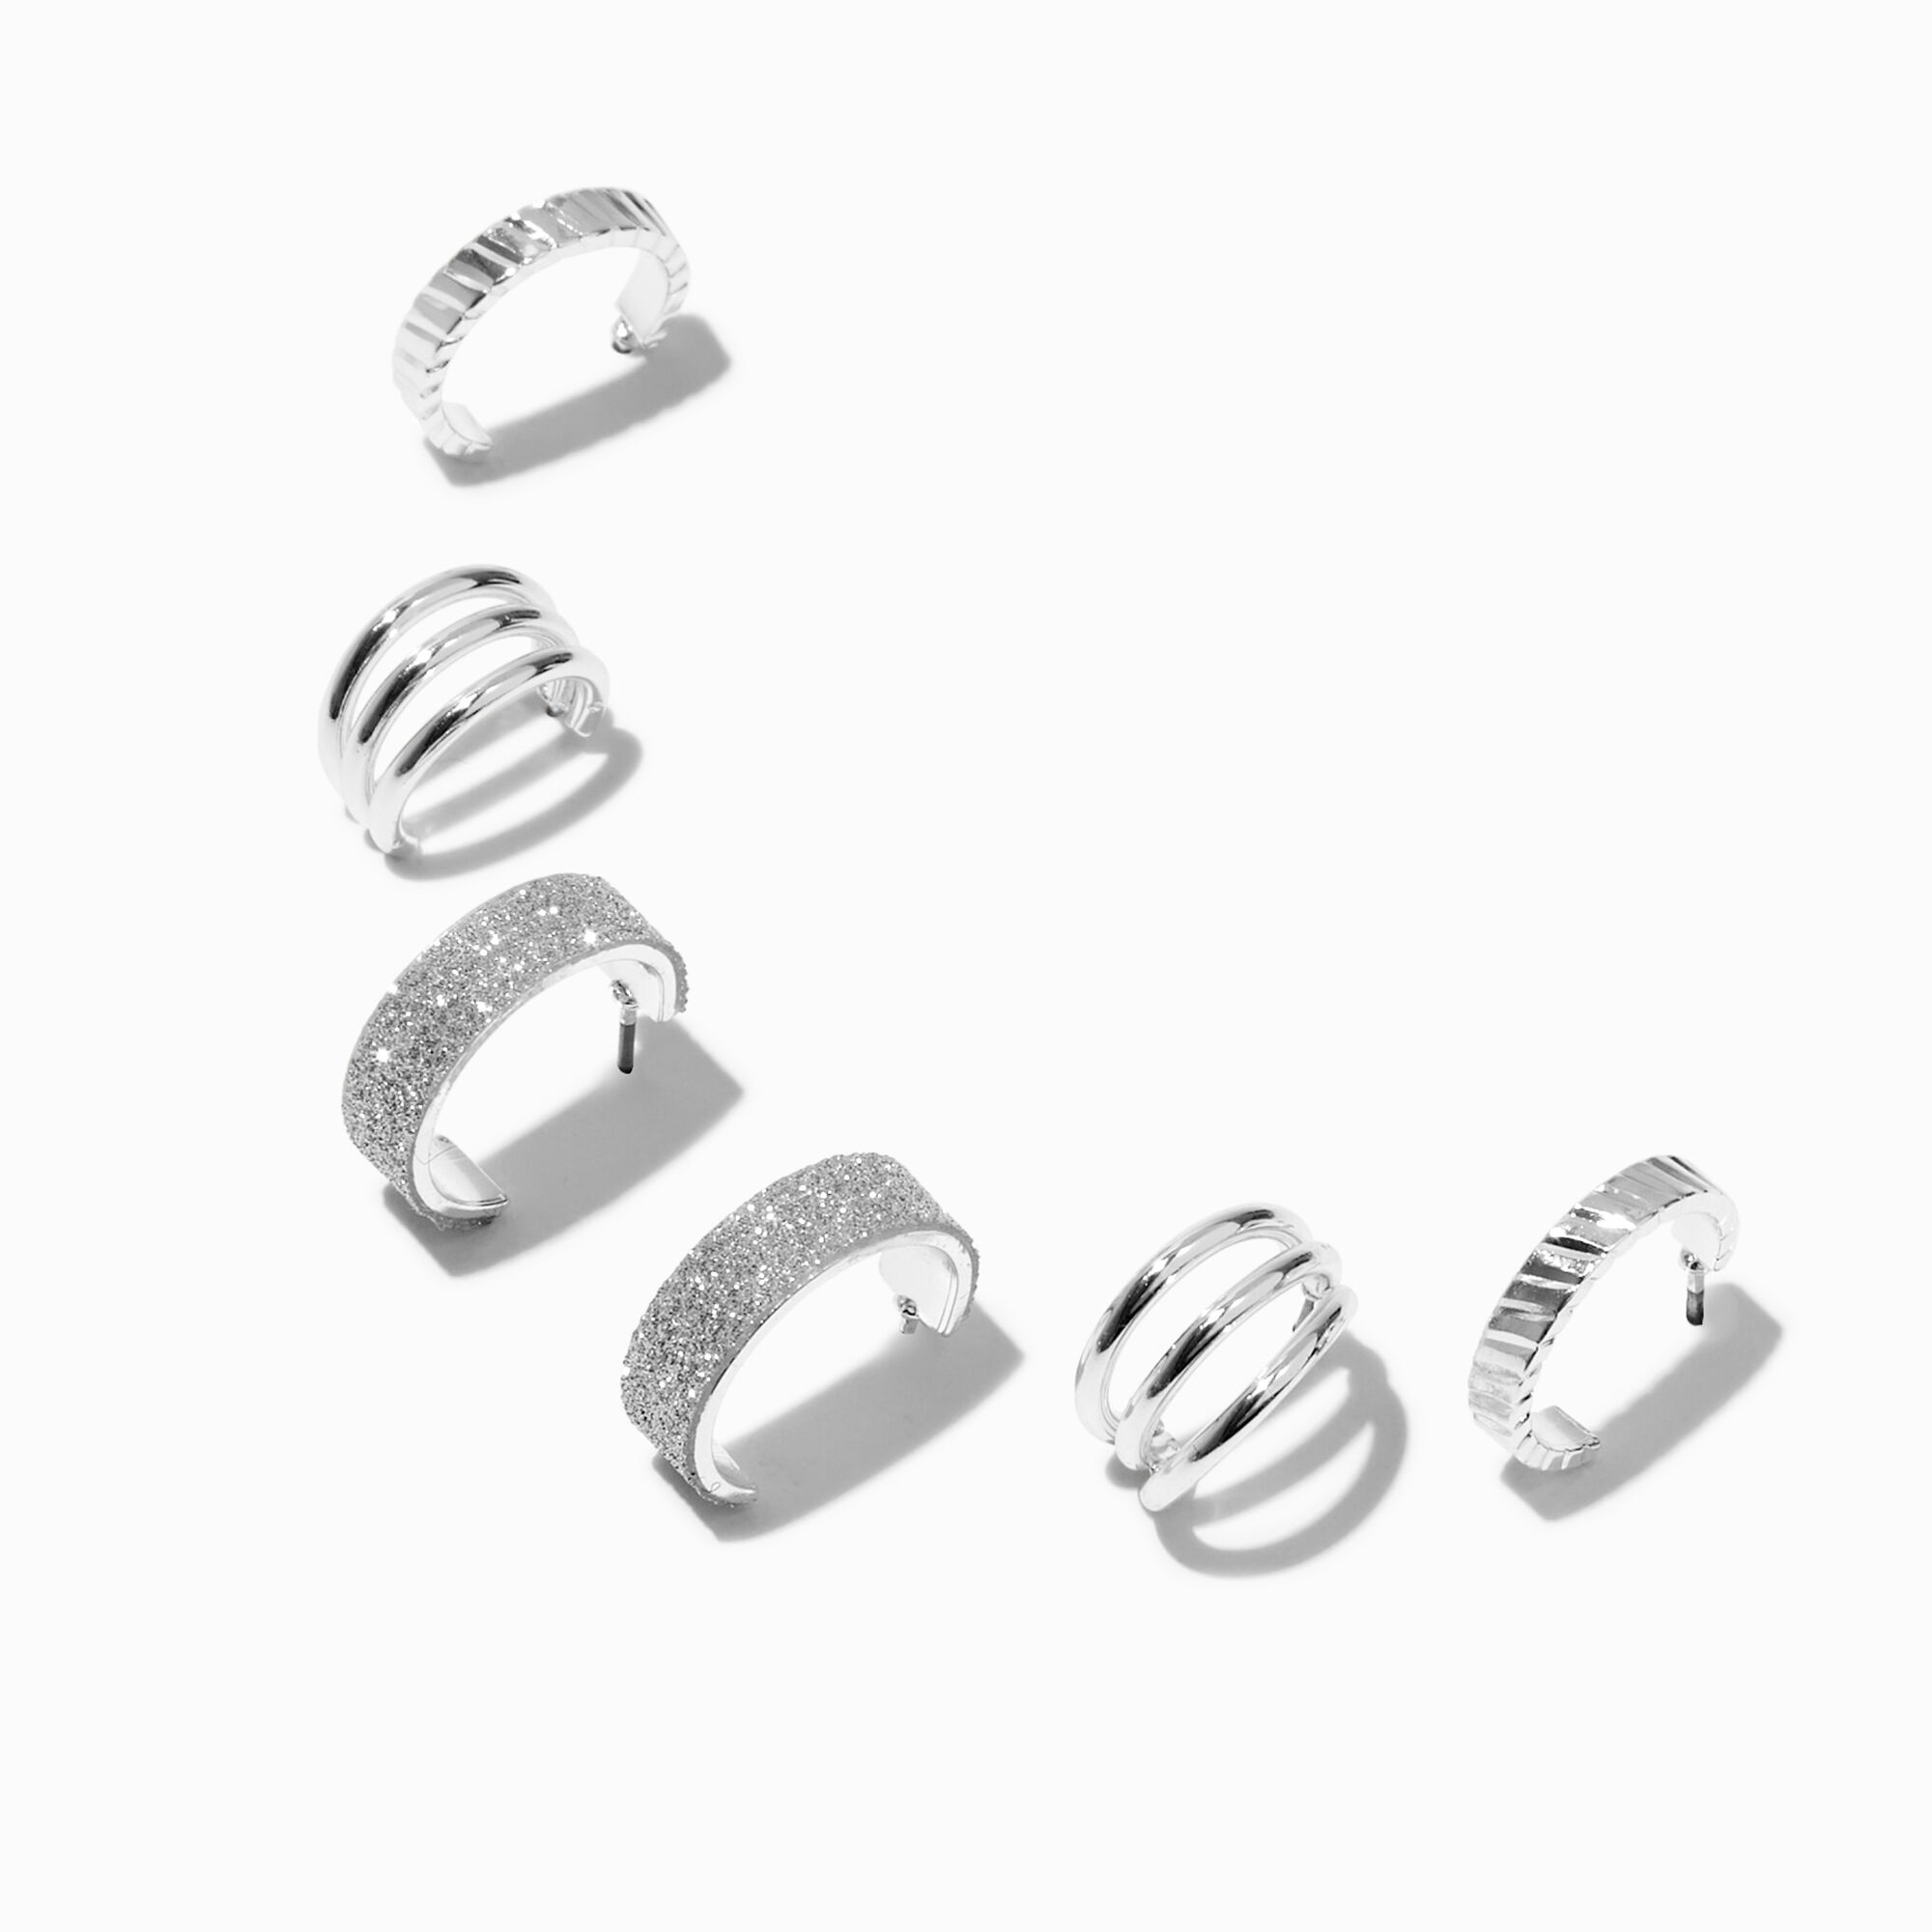 View Claires Tone Glitter Hoop Earring Stackables Set 3 Pack Silver information